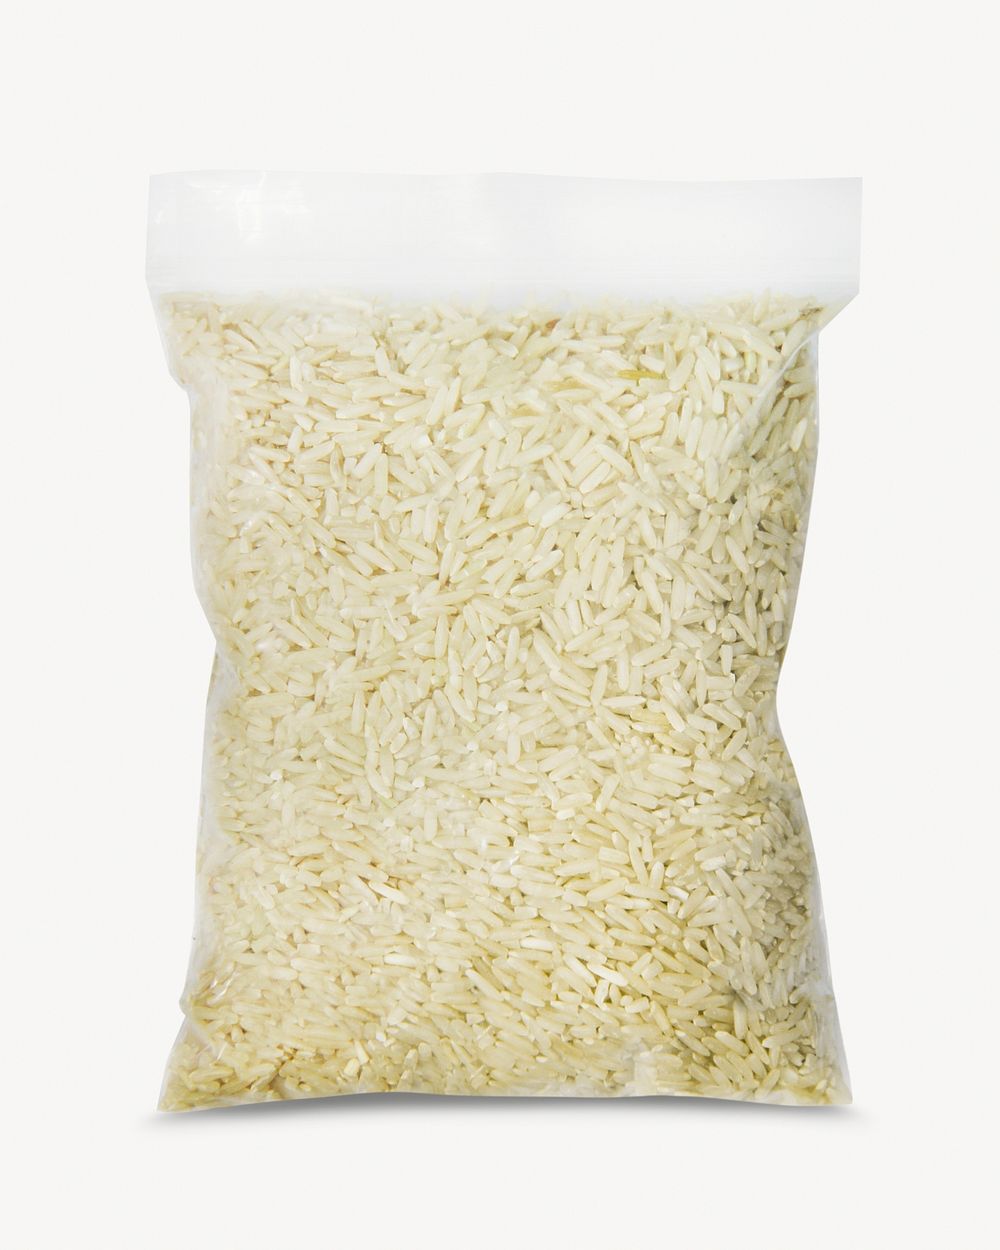 Bag of rice, isolated food image psd